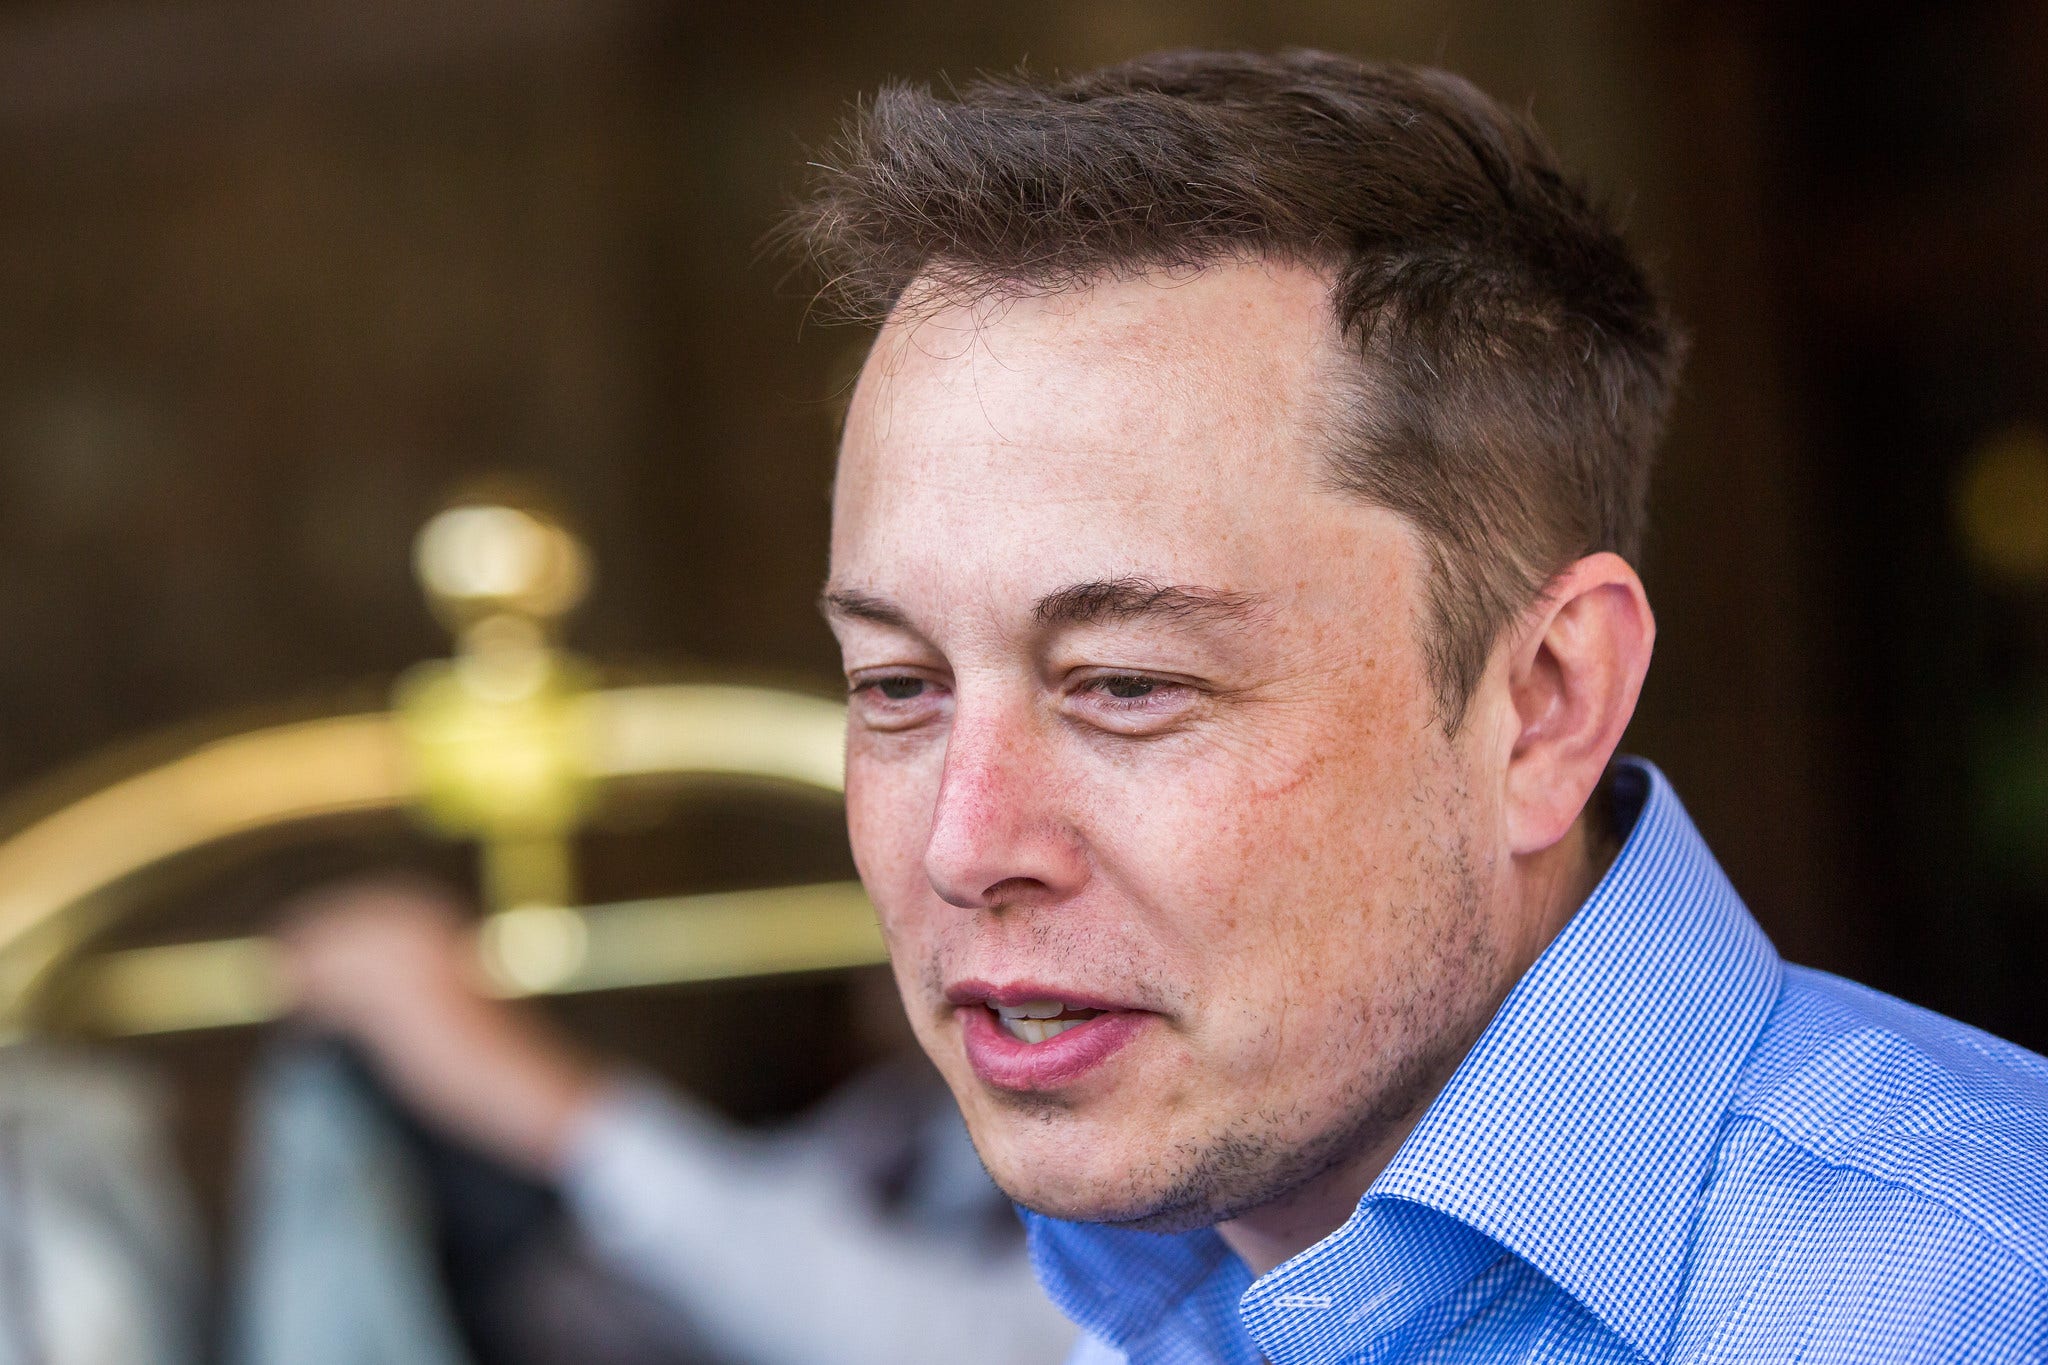 Elon Musk Said To Have Supervised, Dictated Text For Tesla's 2016 Self-Driving Video